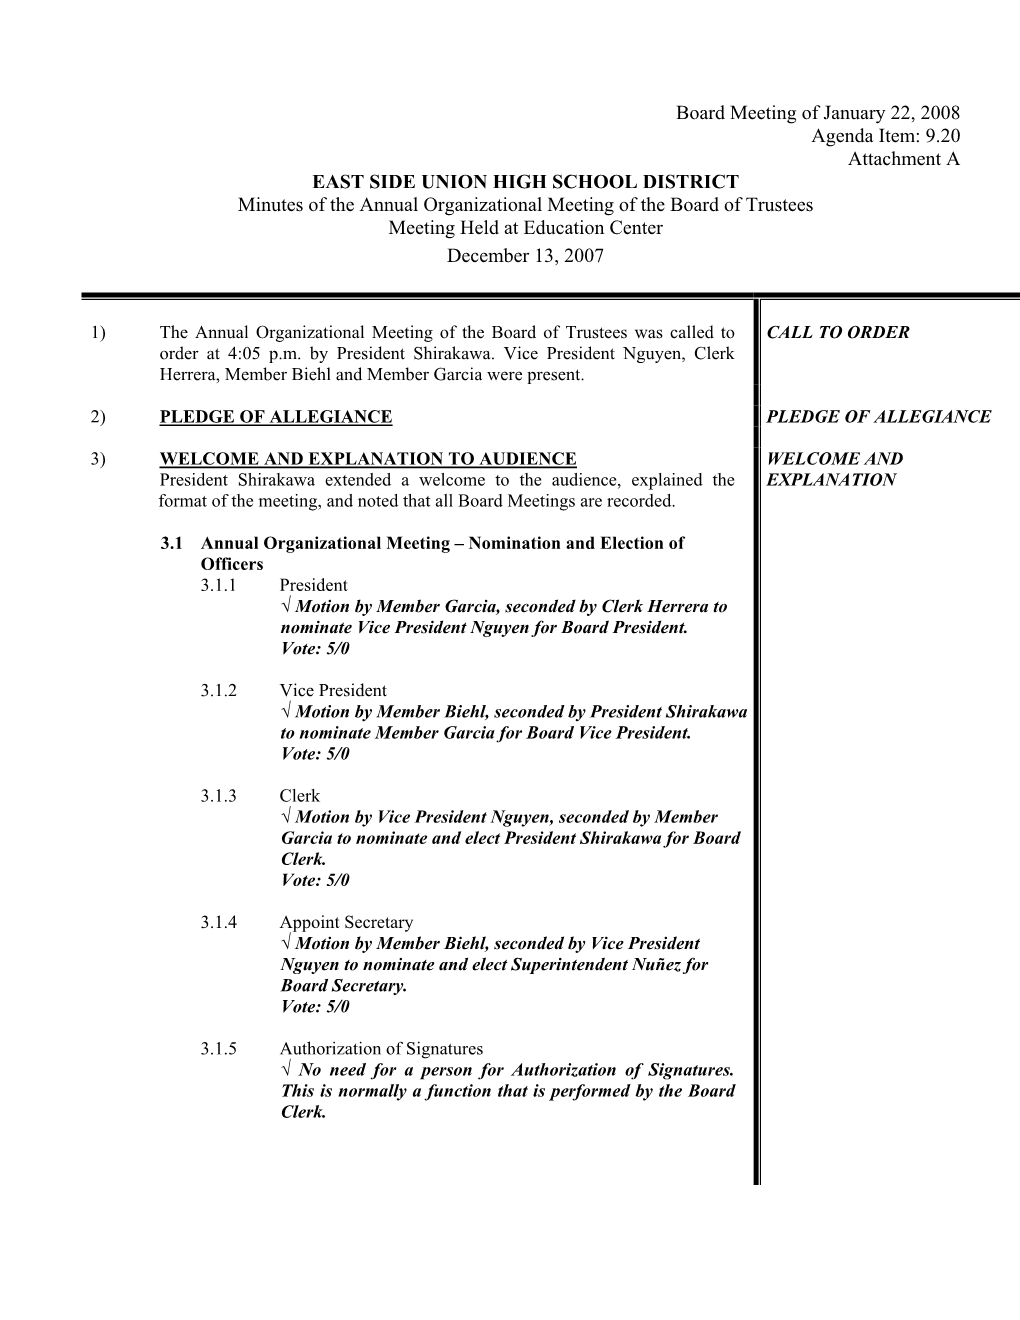 Board Meeting of January 22, 2008 Agenda Item: 9.20 Attachment A